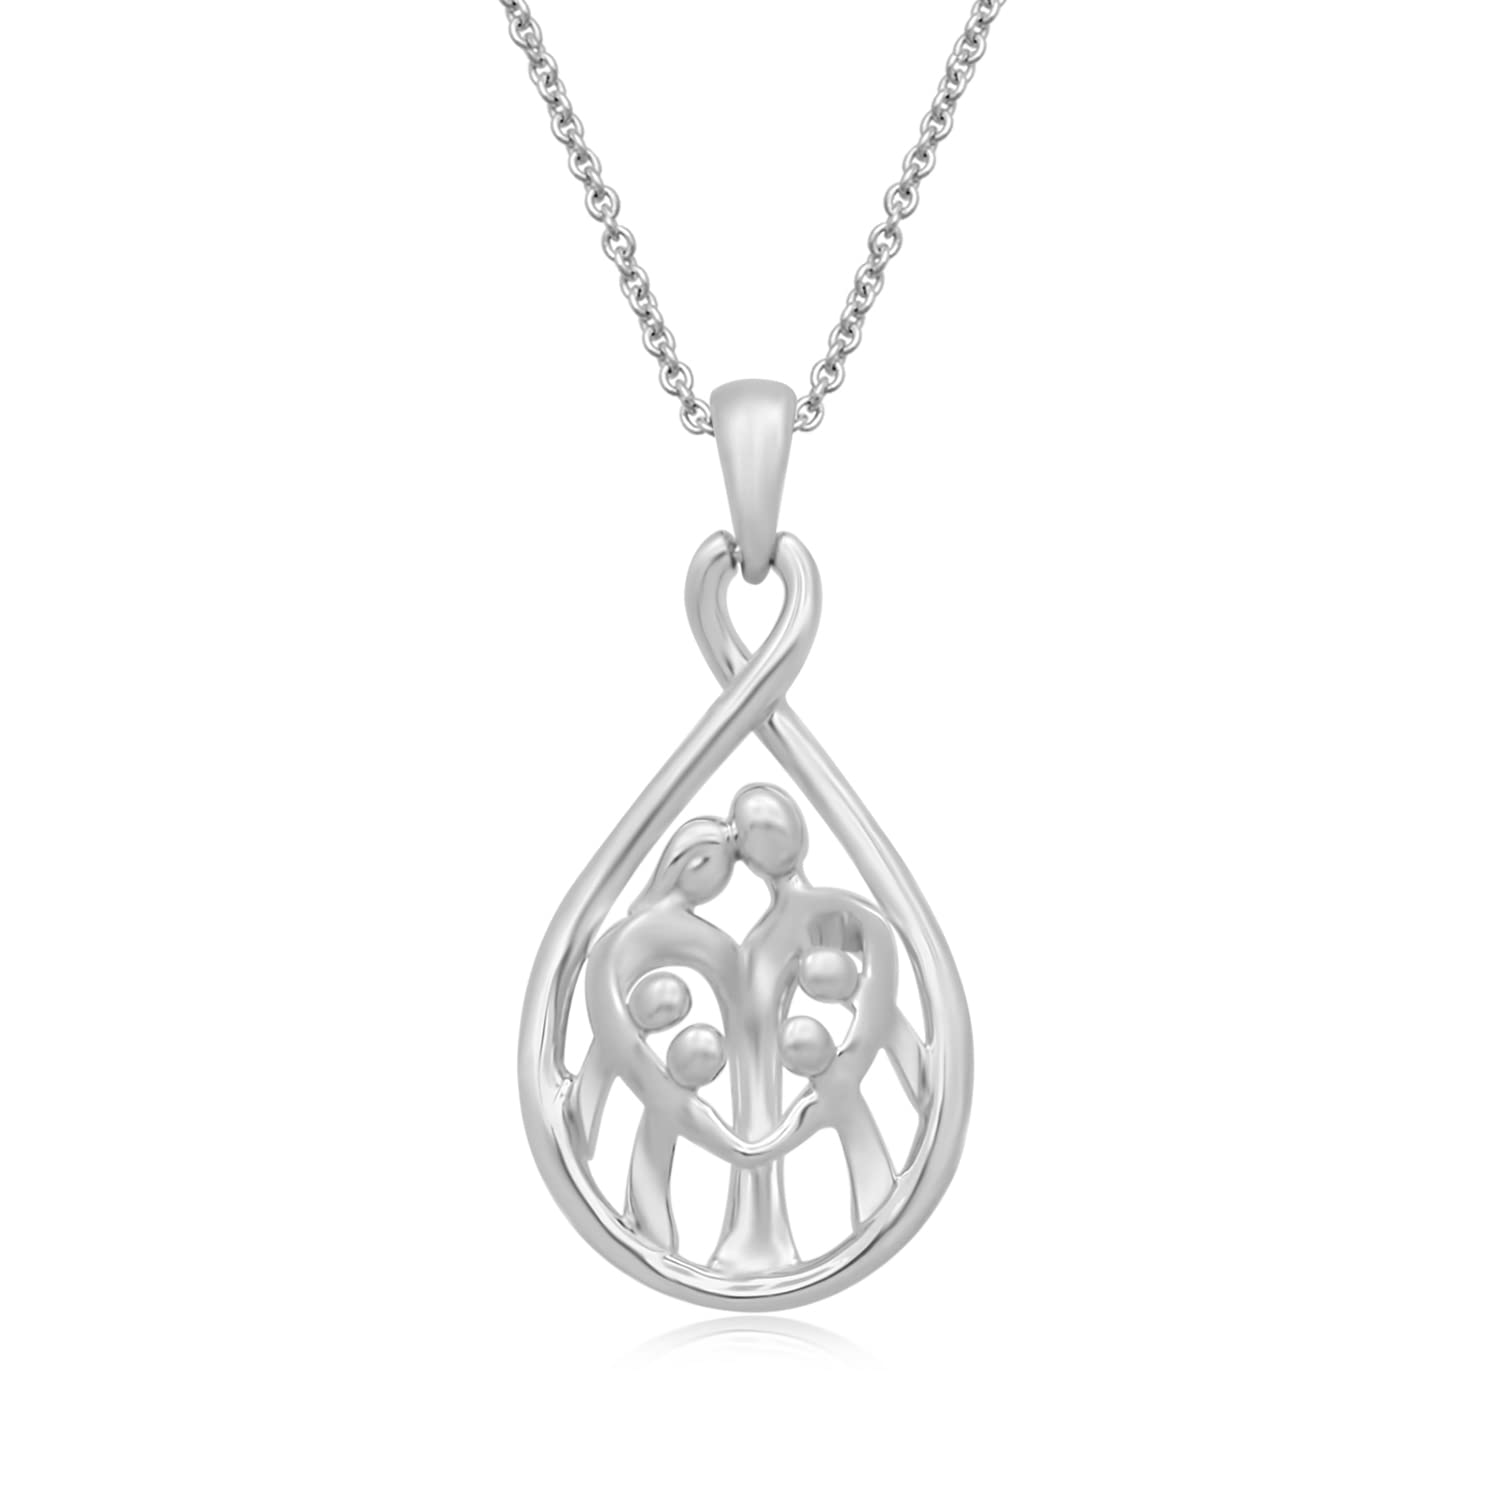 Jewelili Parent and Four Children Family Necklace Pendant in Sterling Silver 18" Cable Chain - image 1 of 11